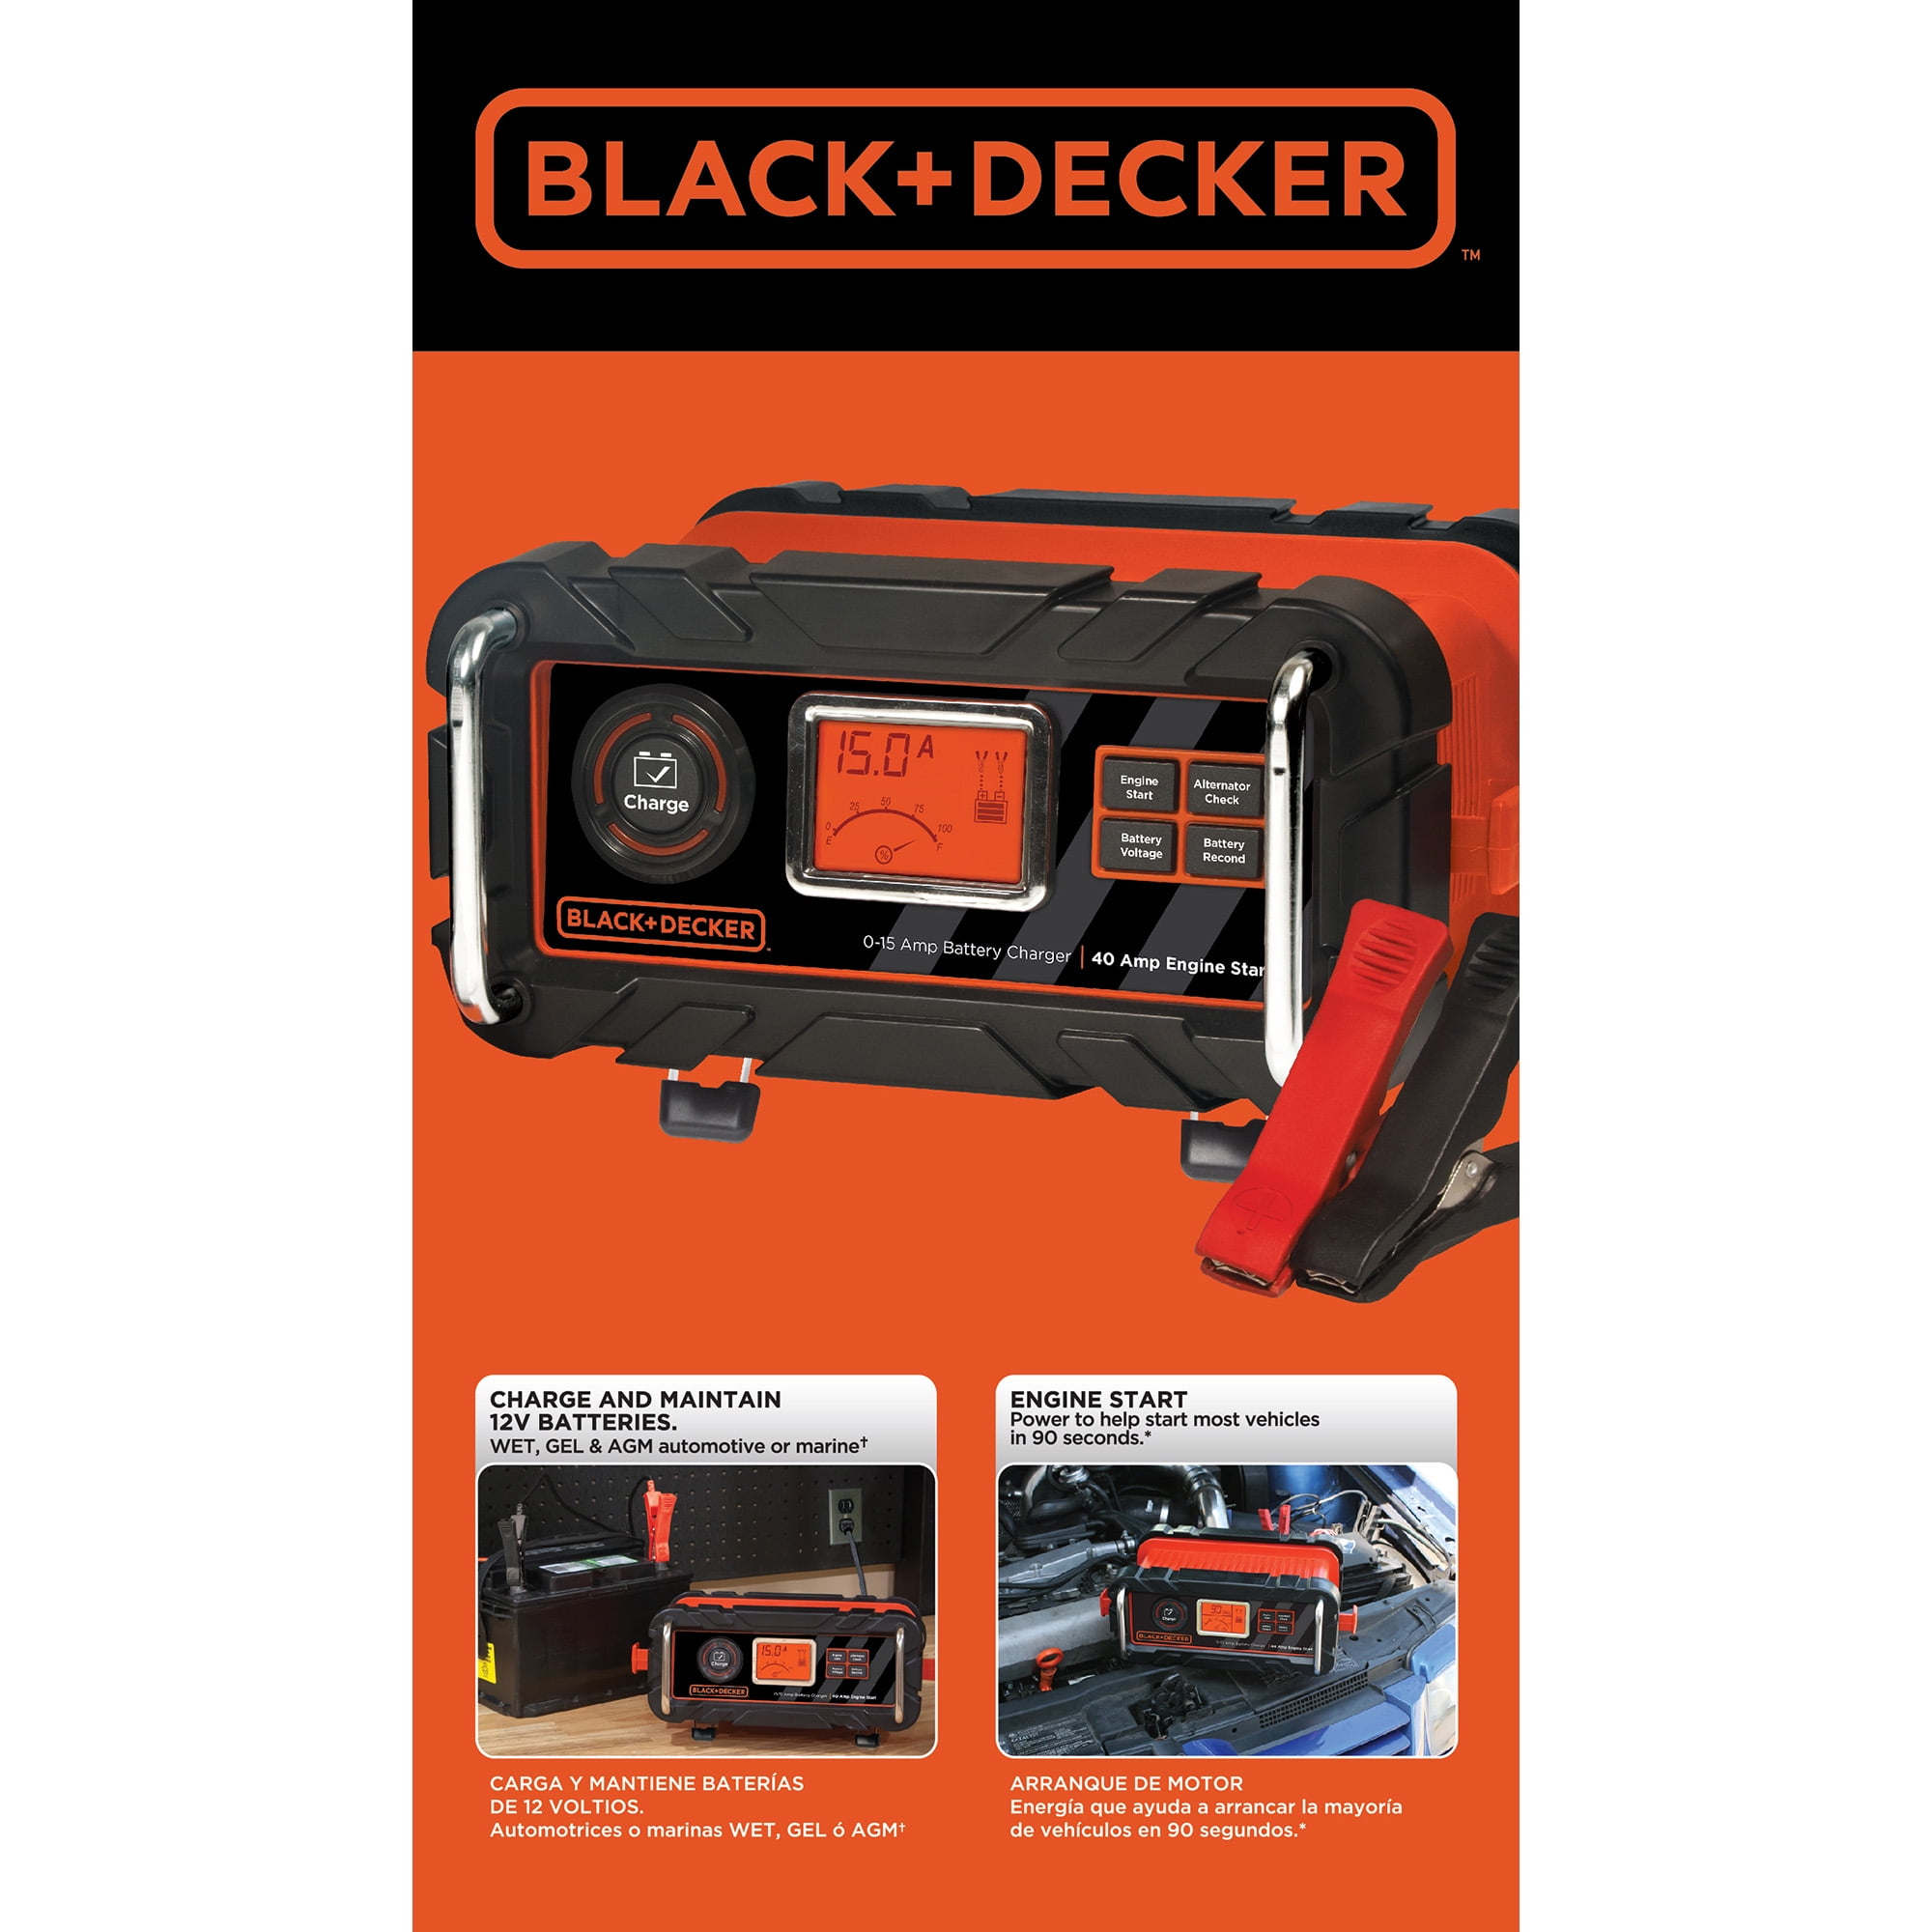 BLACK+DECKER's automatic 15A/12V bench battery charger hits $36